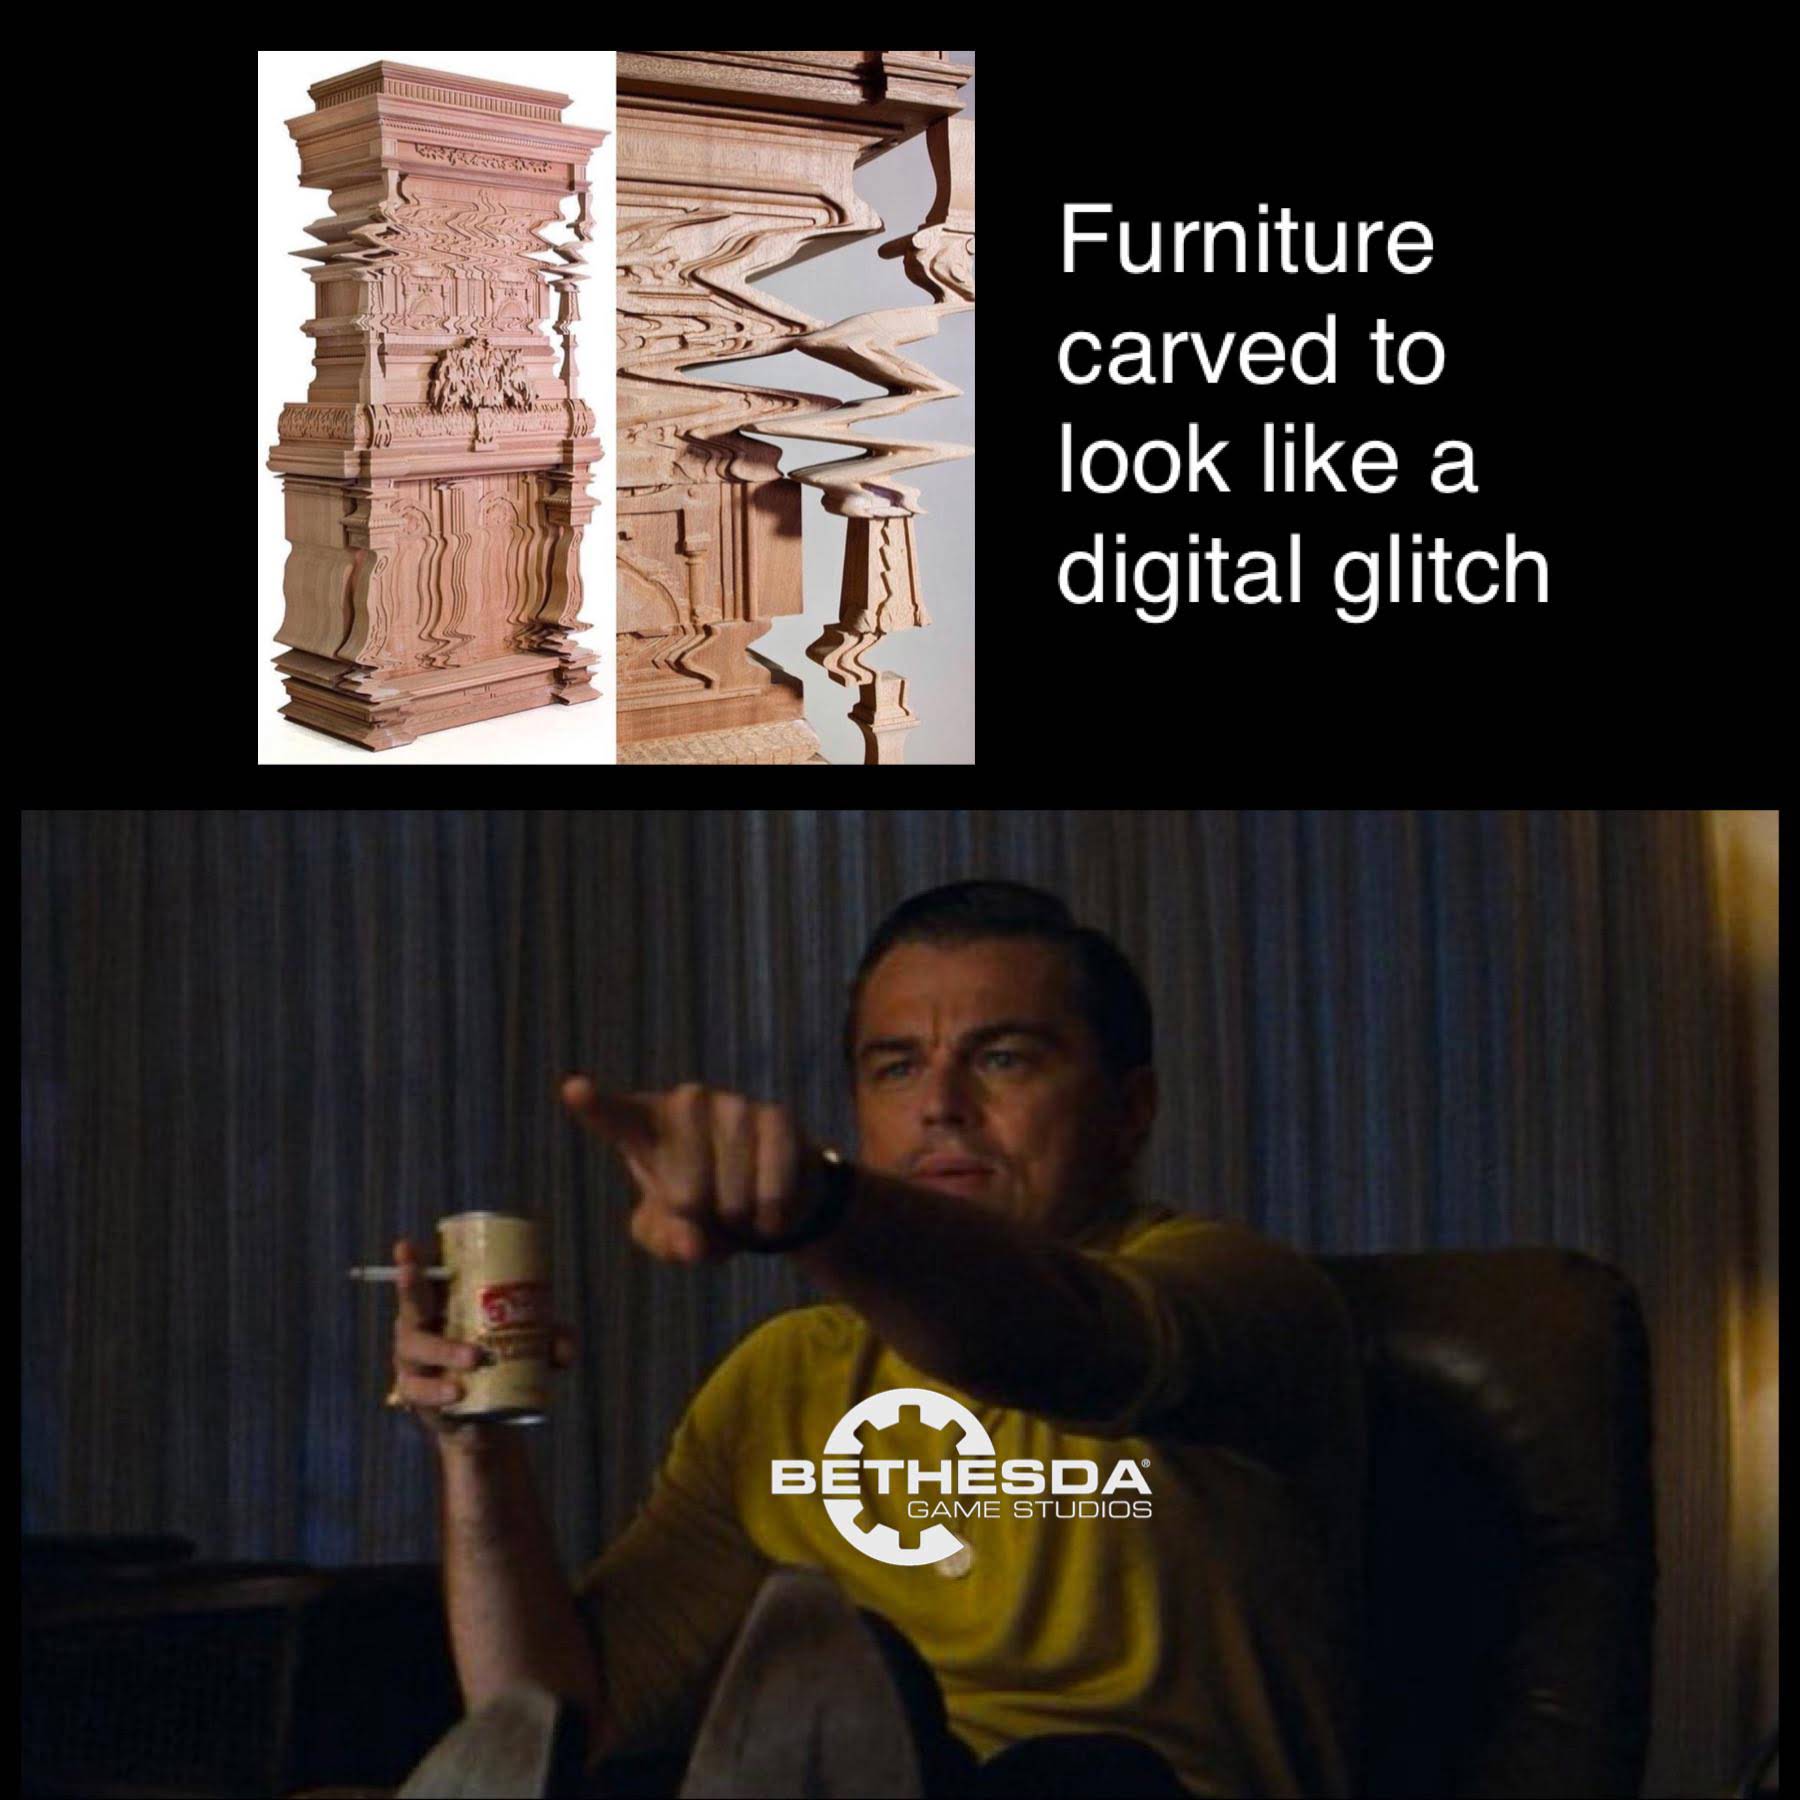 funny gaming memes - Furniture carved to look a digital glitch Bethesda Game Studios